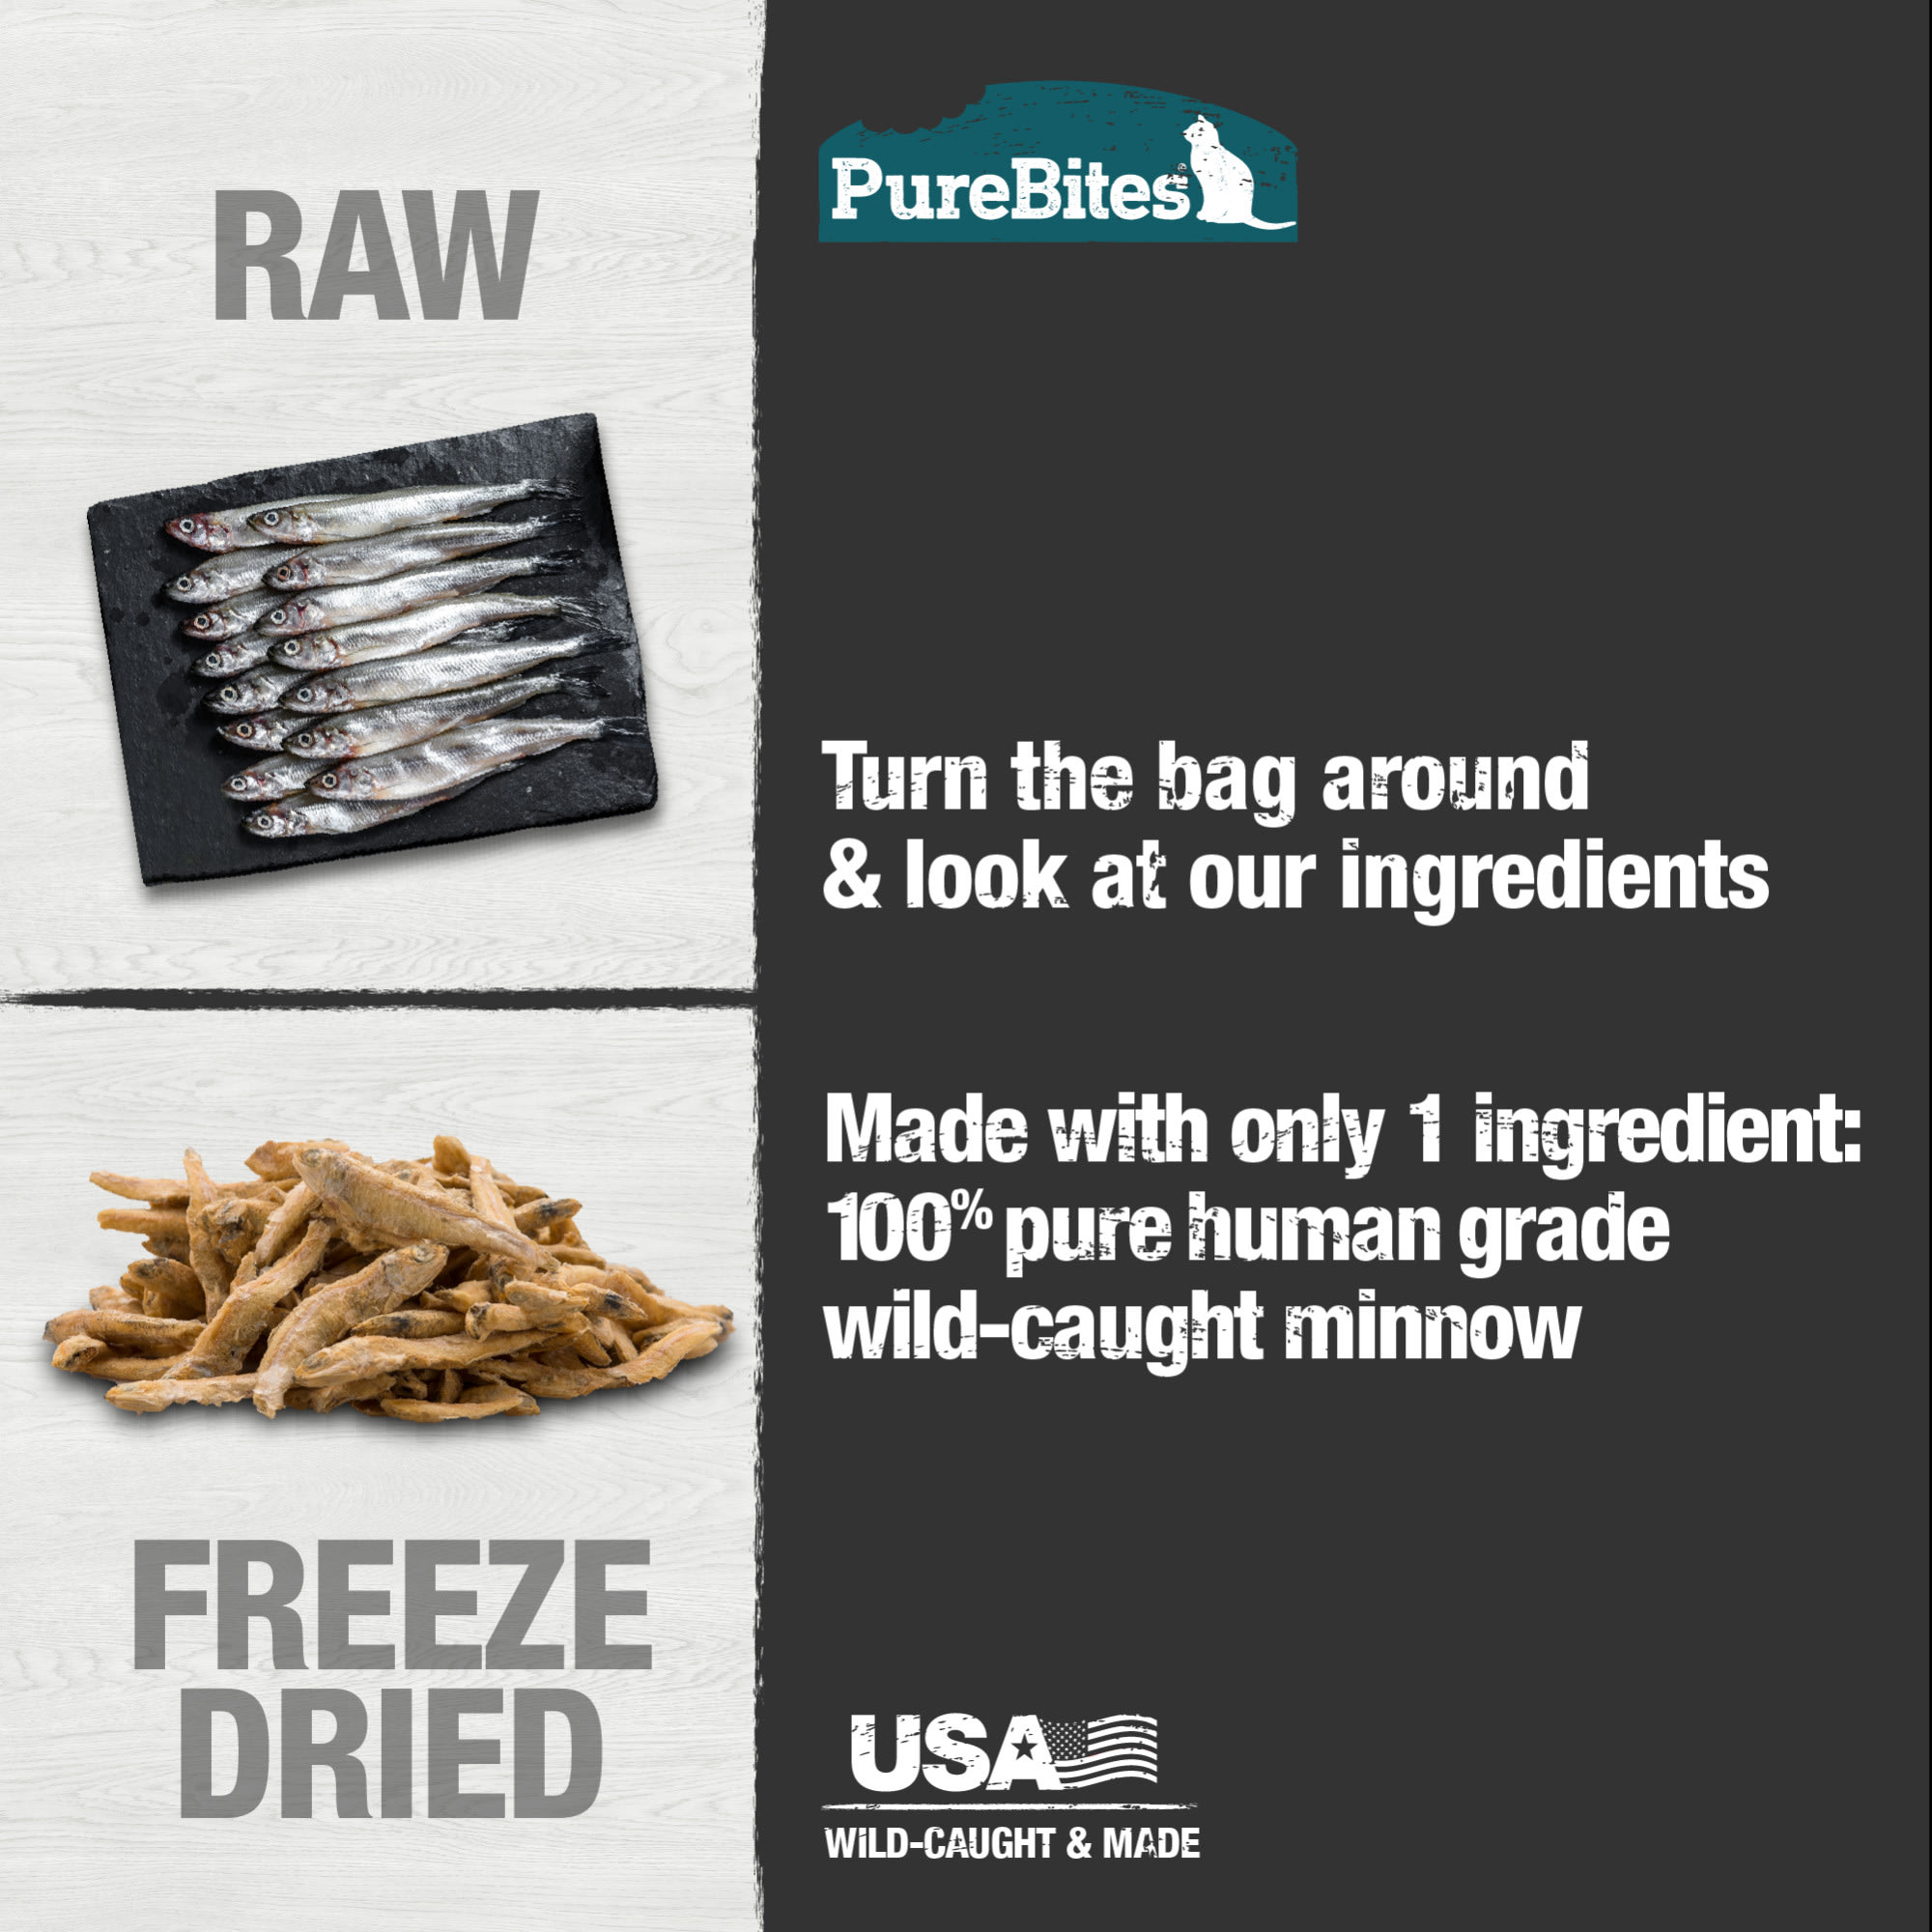 Raw Paws Smelt Freeze Dried Minnows for Cats & Dogs, 2-oz - Minnows for  Dogs - Freeze Dried Cat Treats - Minnow Treats for Dogs - Fish Dog Treats 